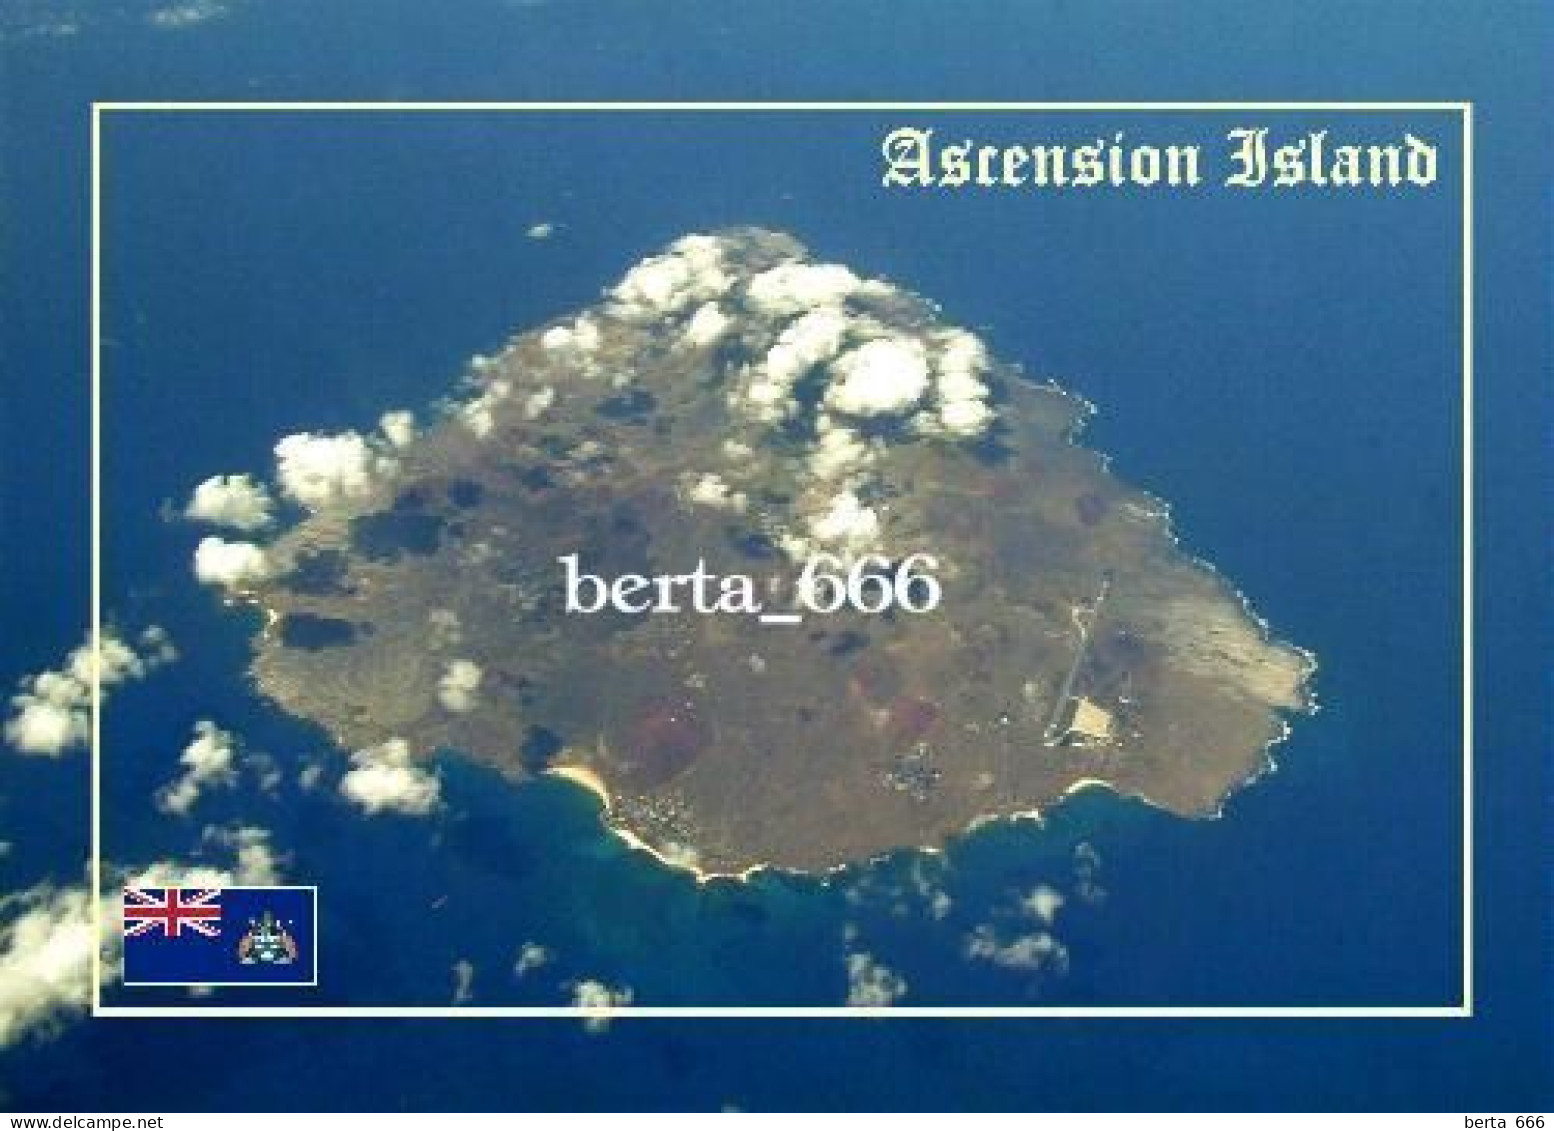 Ascension Island Aerial View New Postcard - Ascension